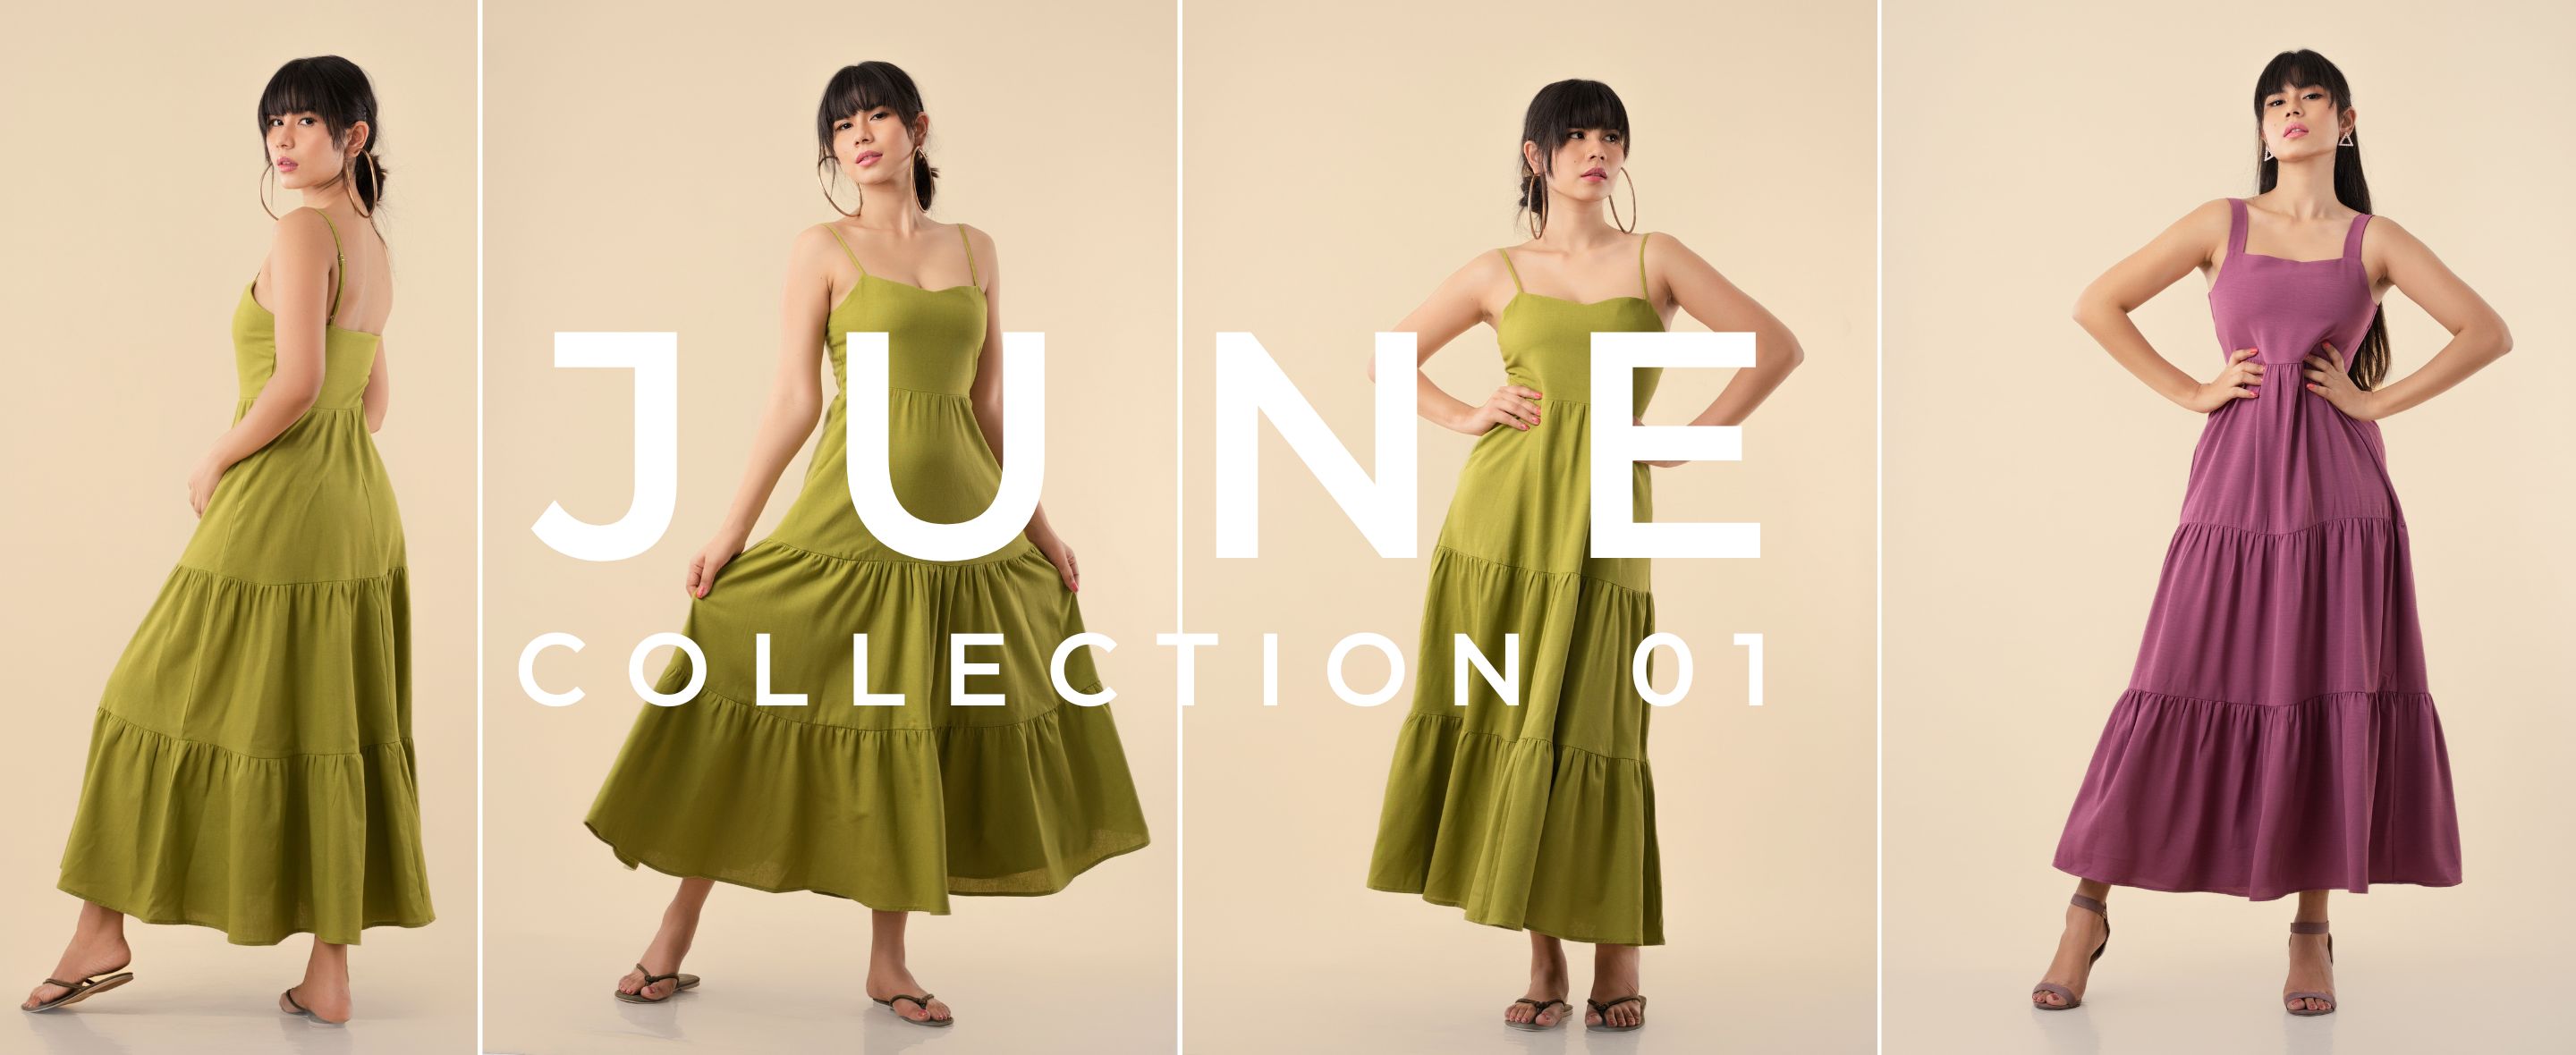 New collection 3 May 23